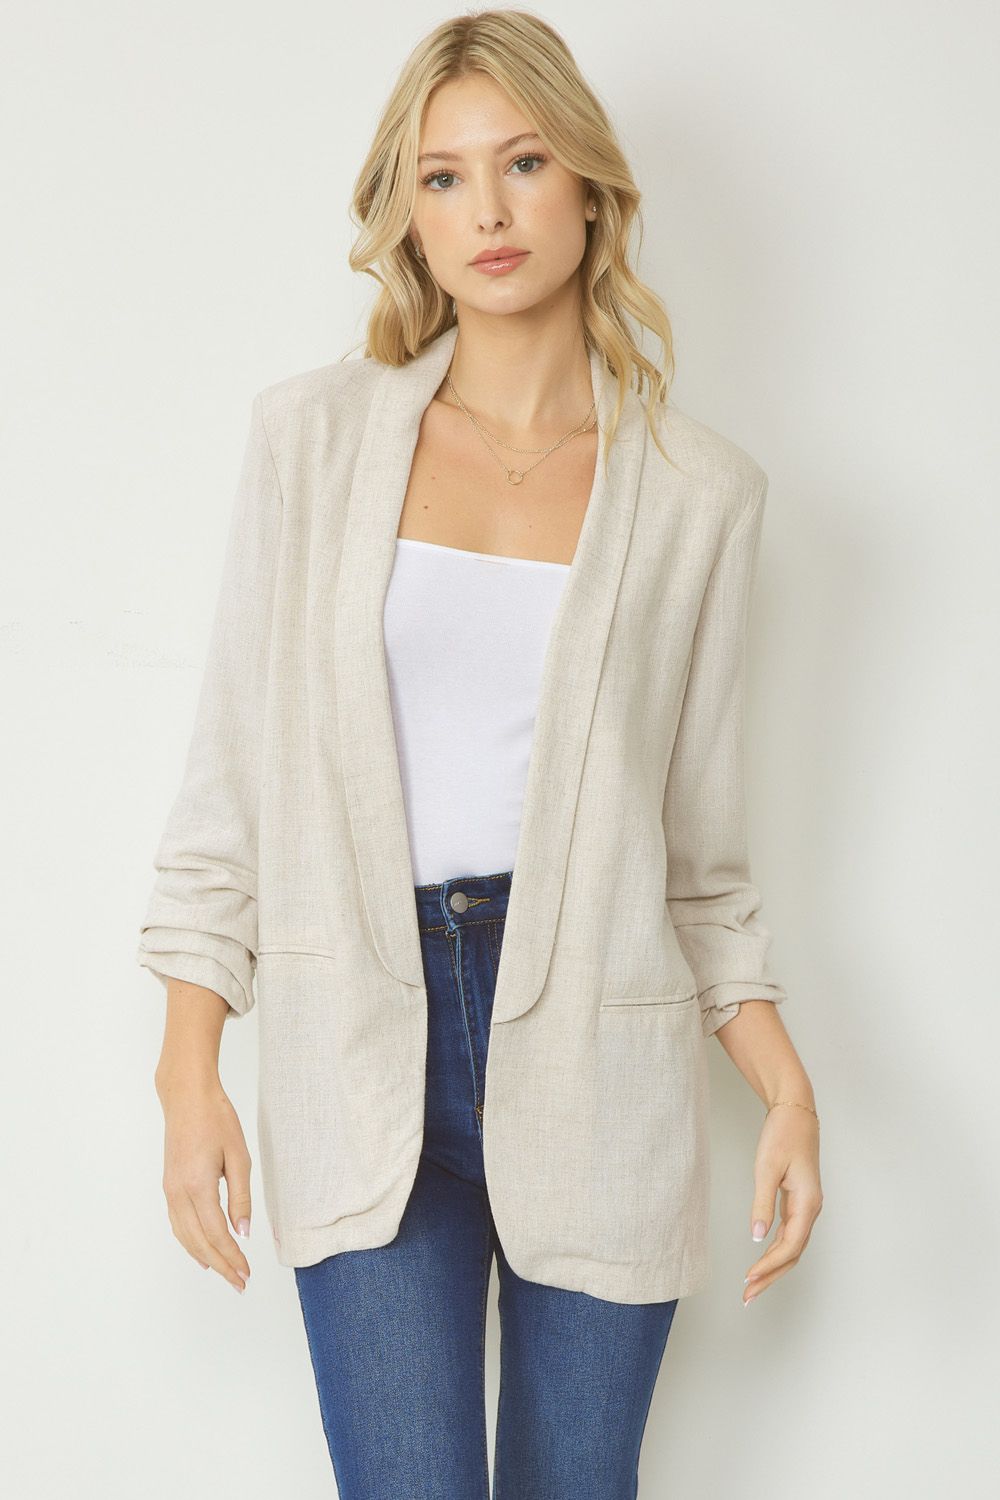 Entro Clothing Solid Blazer Jacket with Shirred Detail Sleeve ...